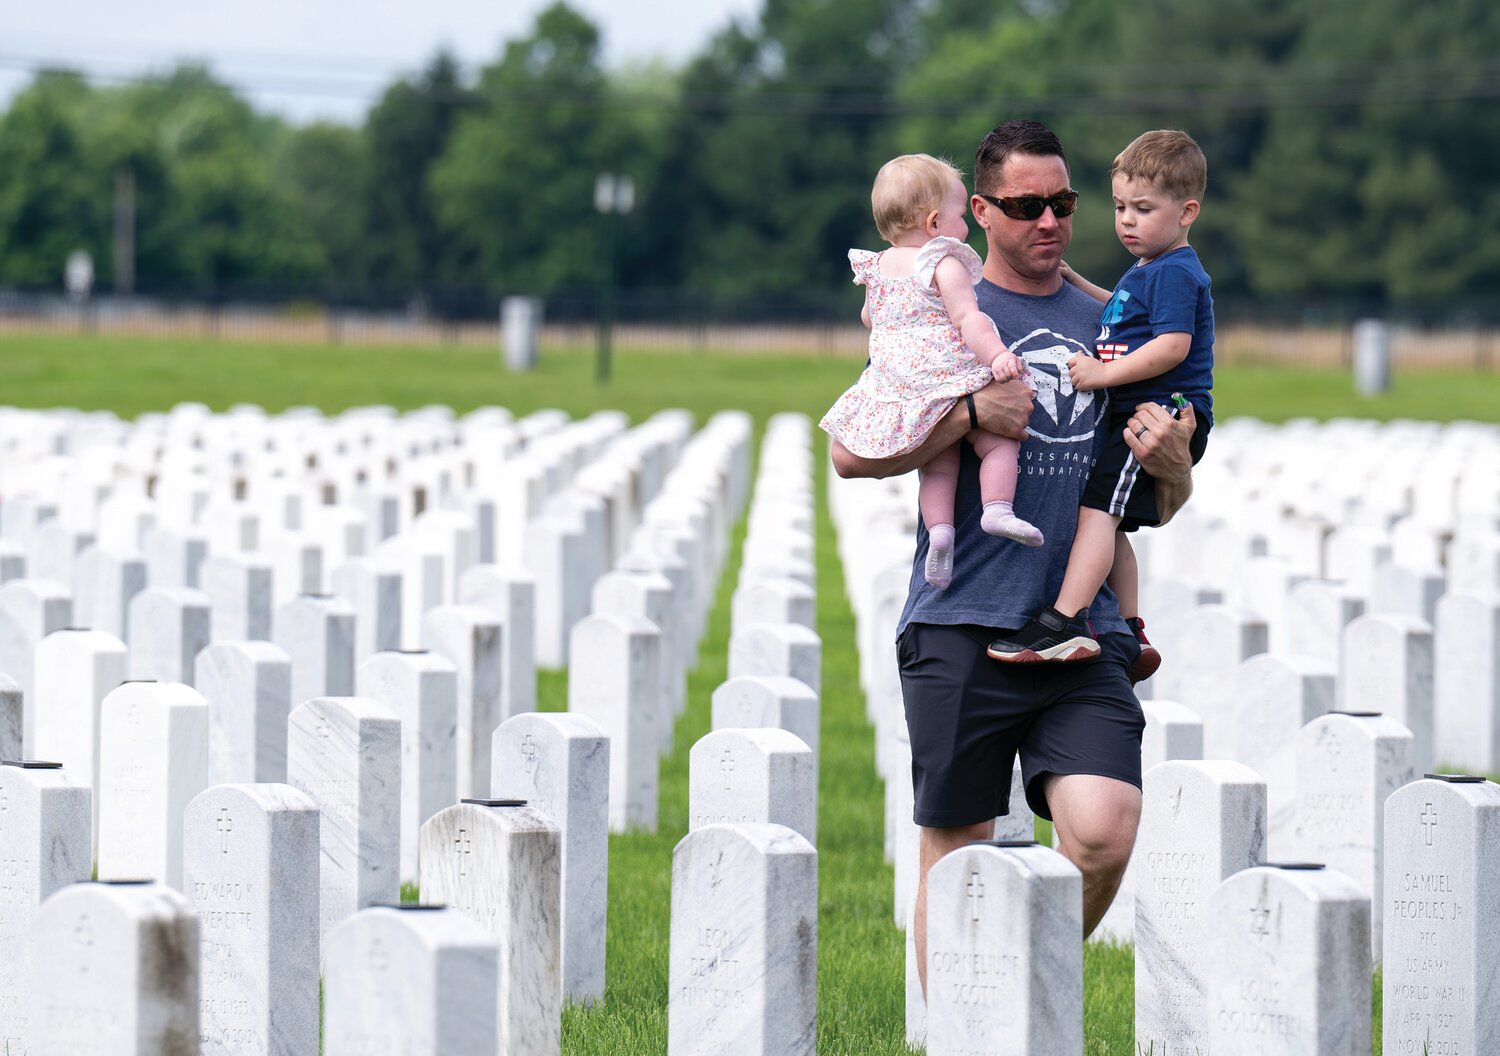 Families pay their respects at Washington Crossing National Cemetery on Memorial Day.